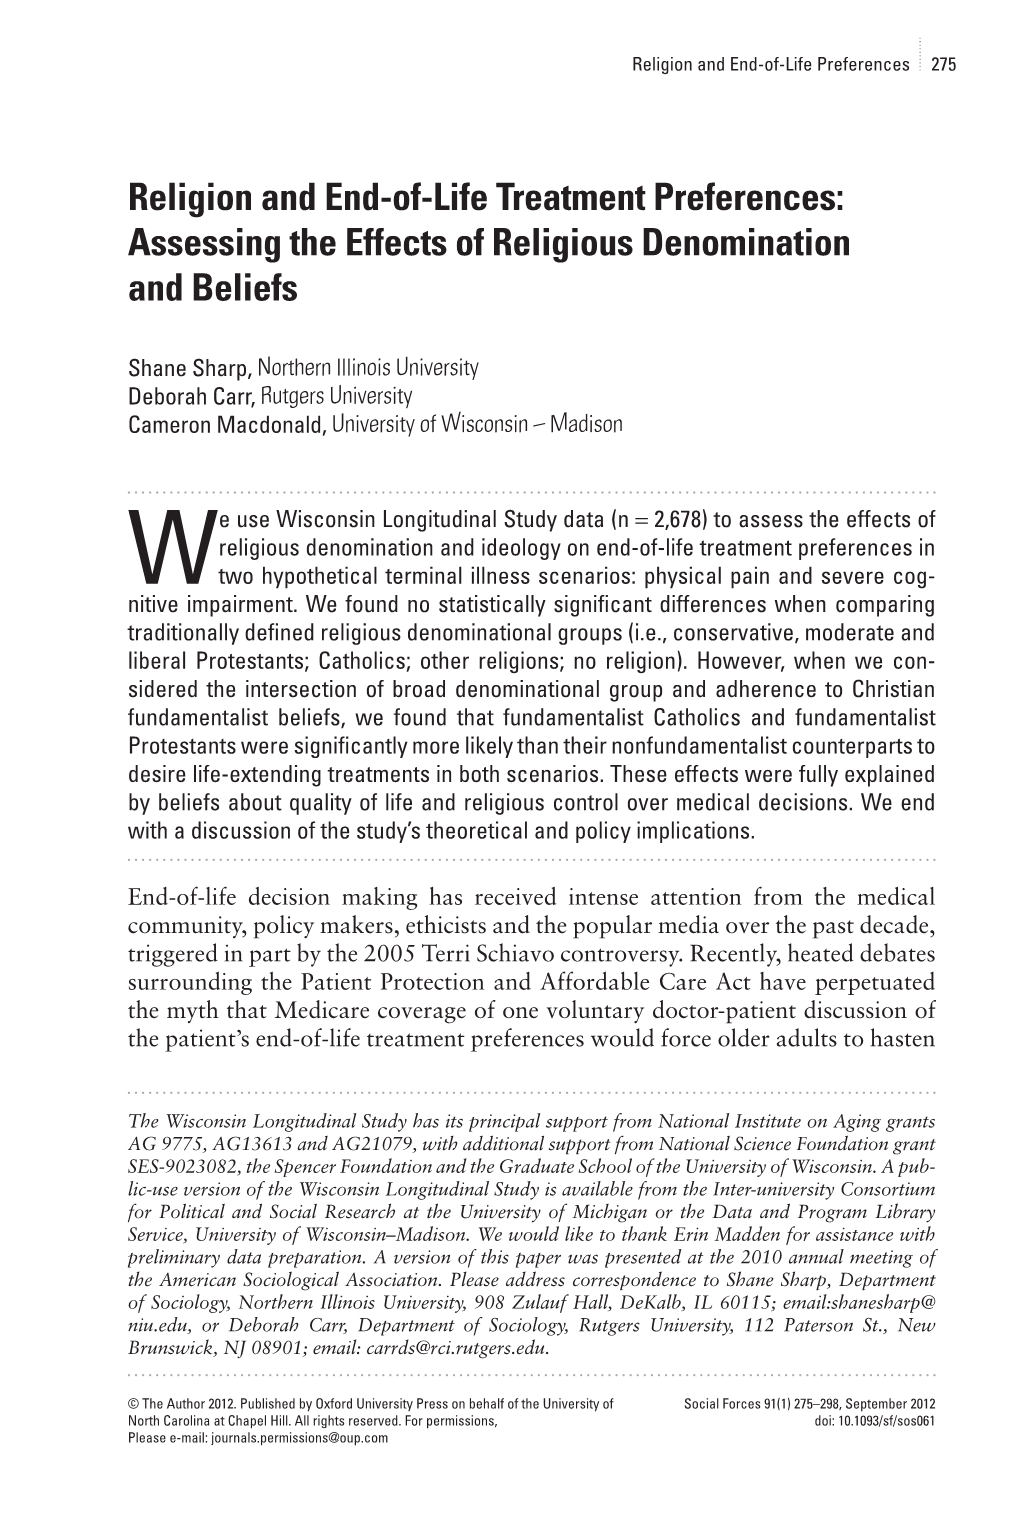 Religion and End-Of-Life Treatment Preferences: Assessing the Effects of Religious Denomination and Beliefs